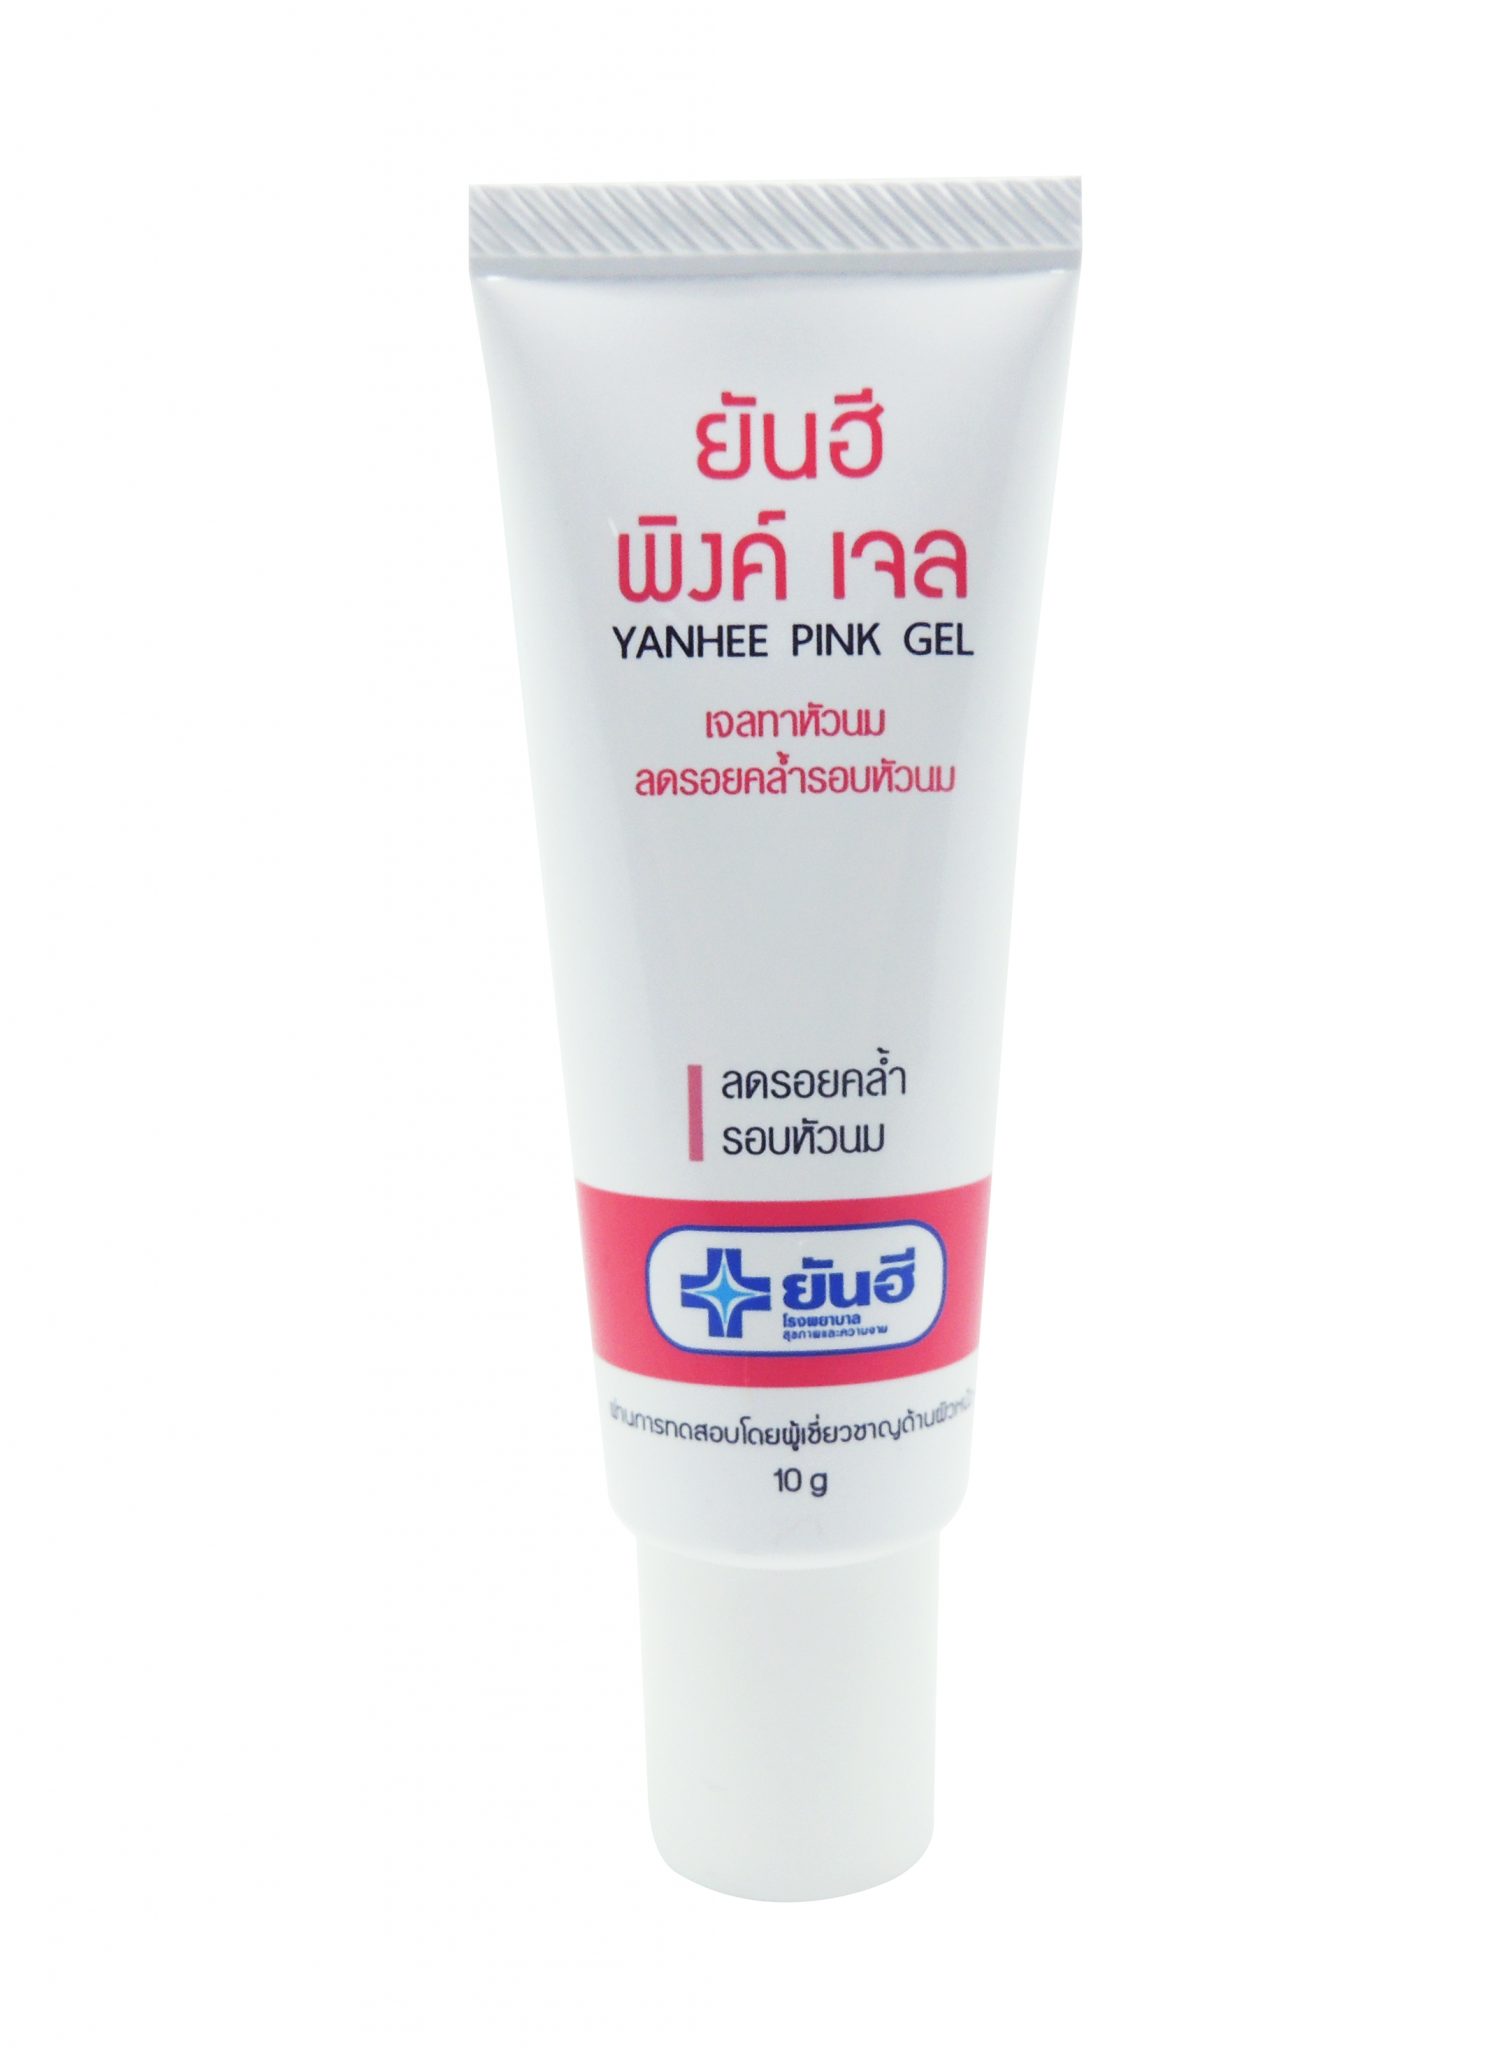 Yanhee Pink Gel - Thailand Best Selling Products - Online ...